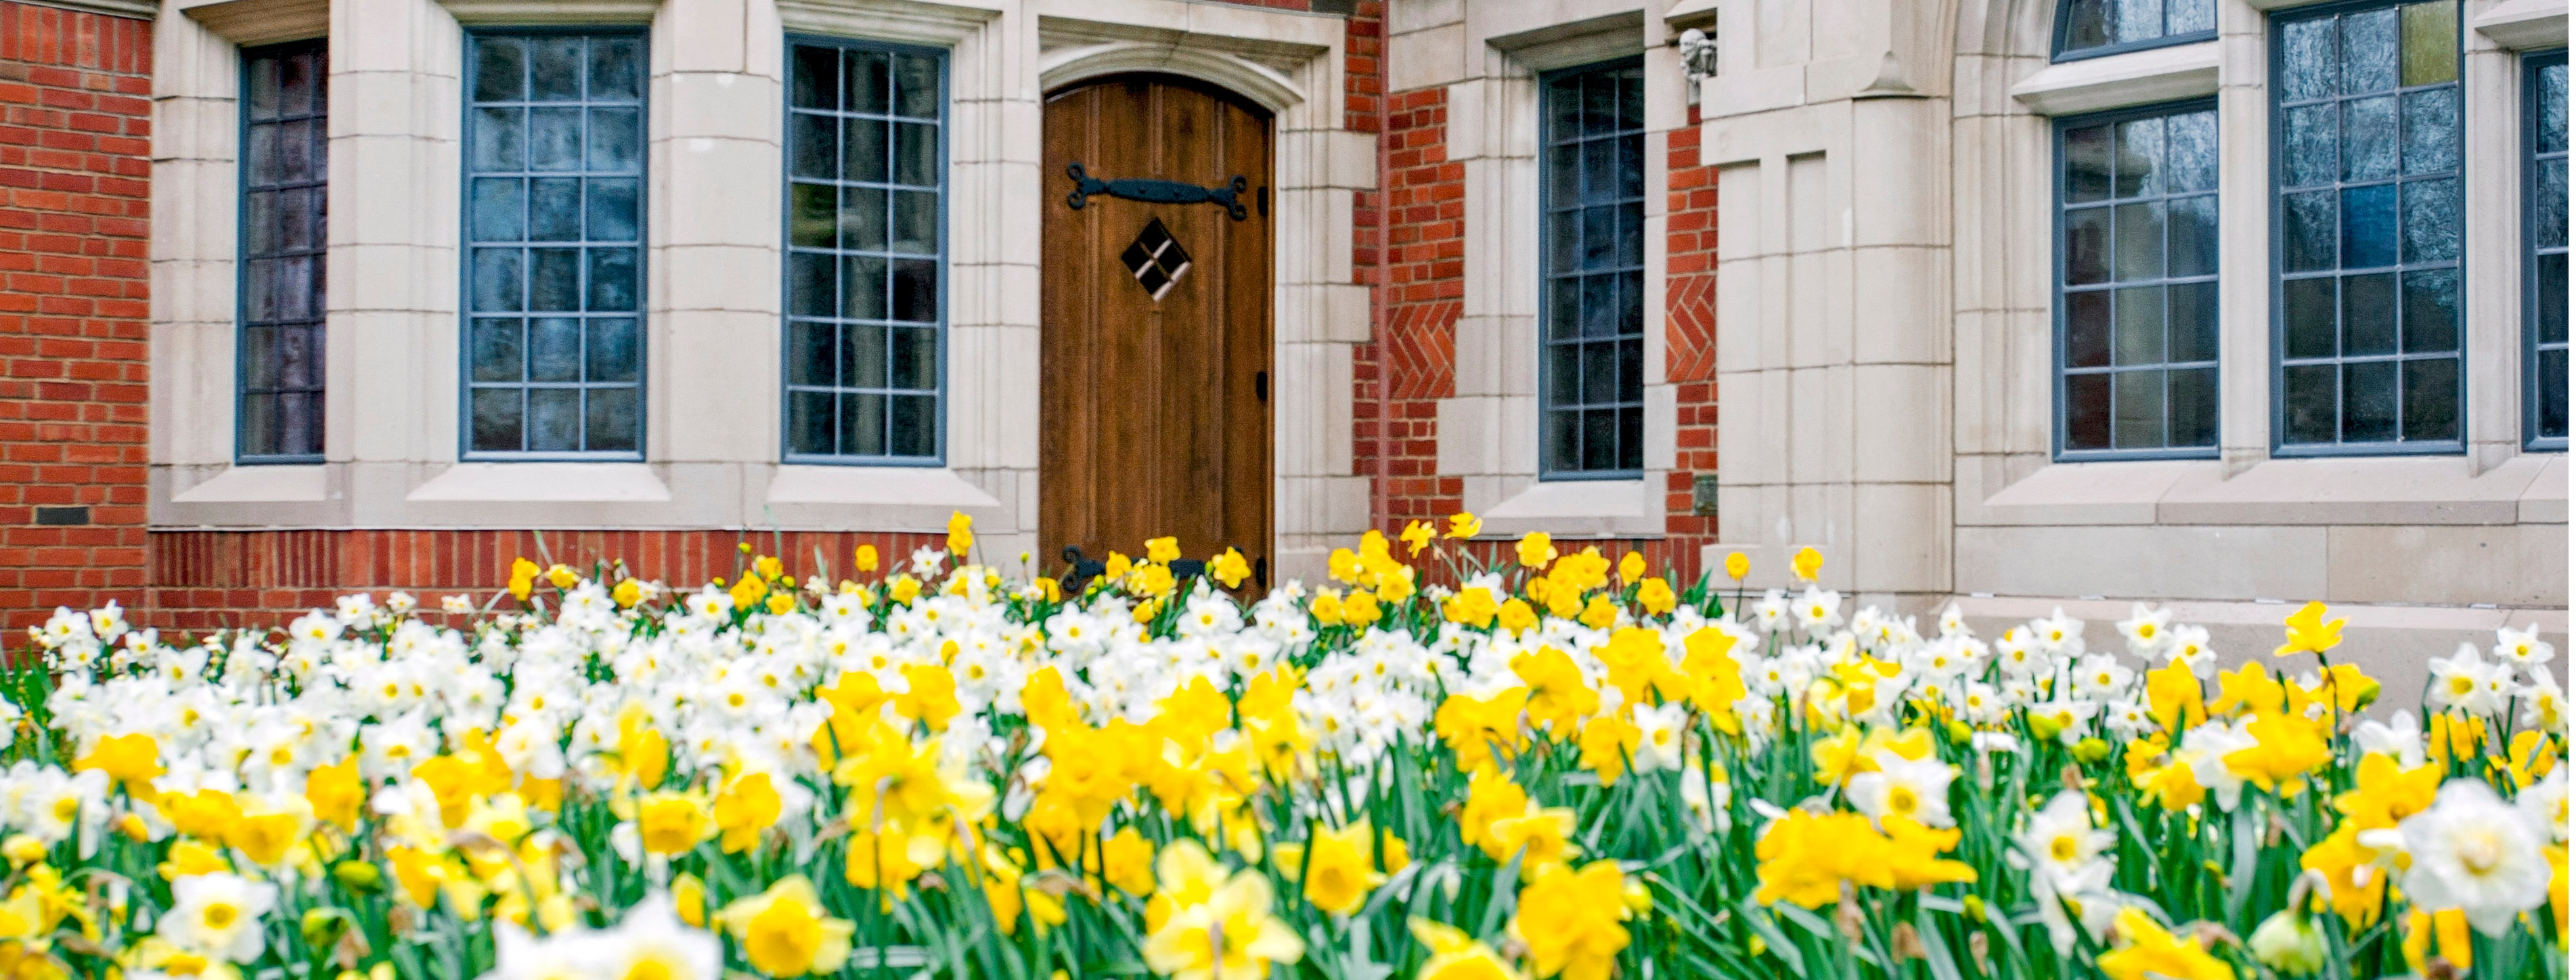 Yale building with yellow and white daffodils 